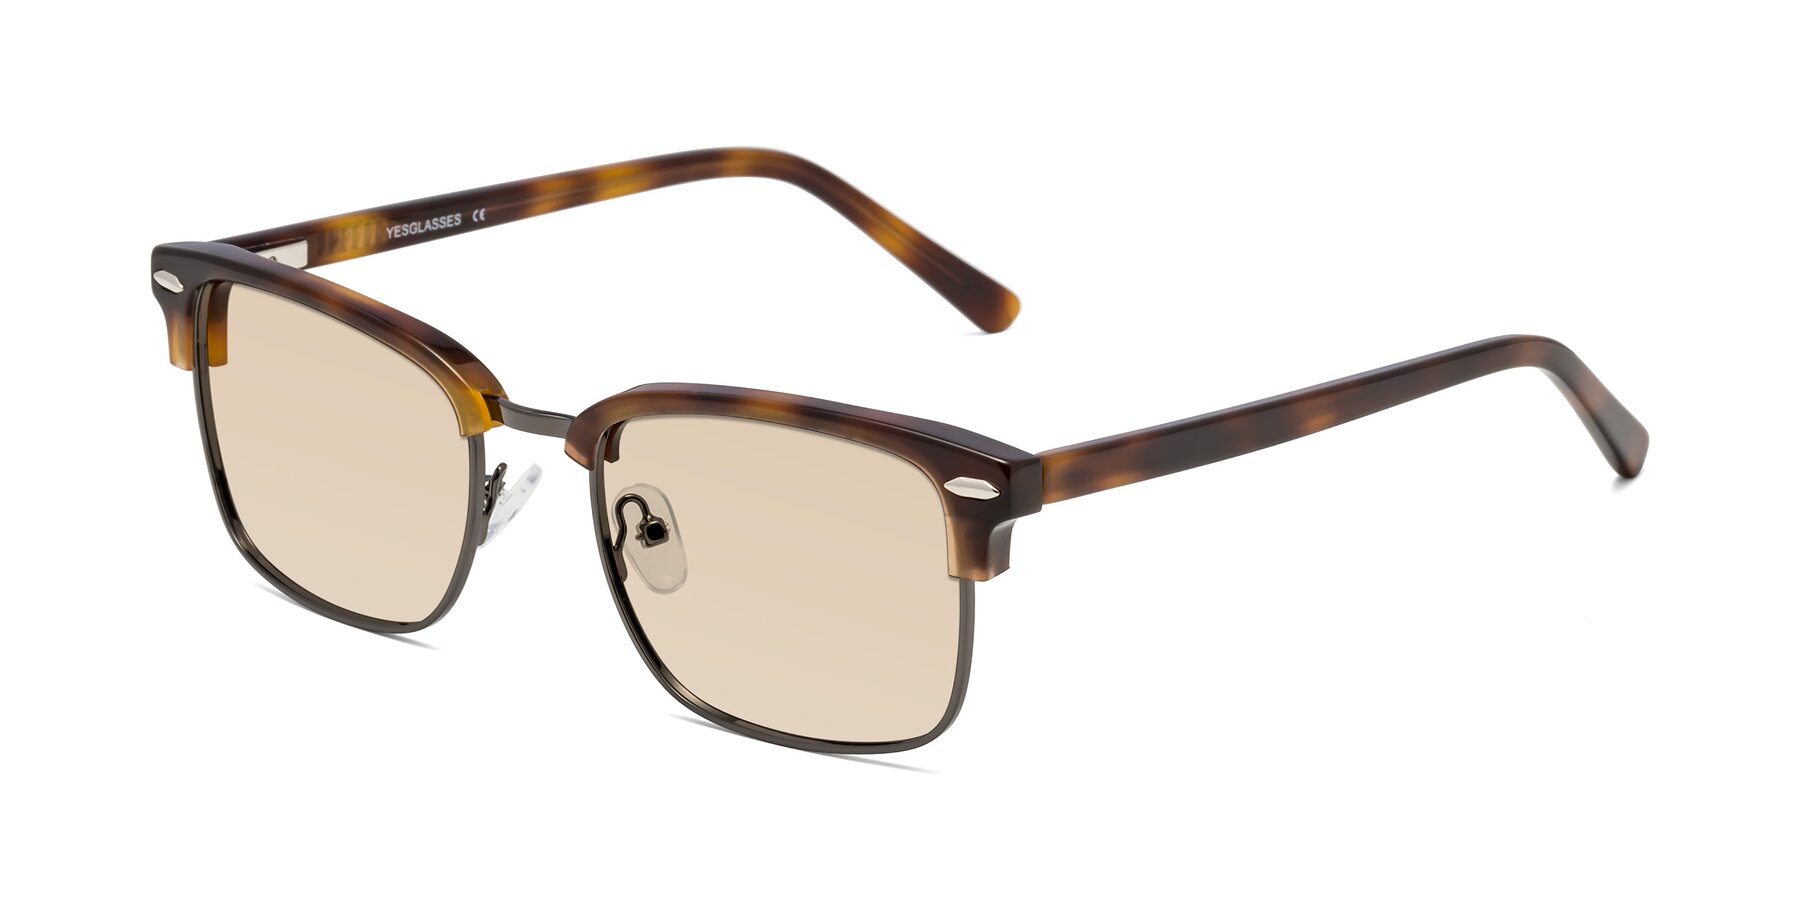 Angle of 17464 in Tortoise/ Gunmetal with Light Brown Tinted Lenses